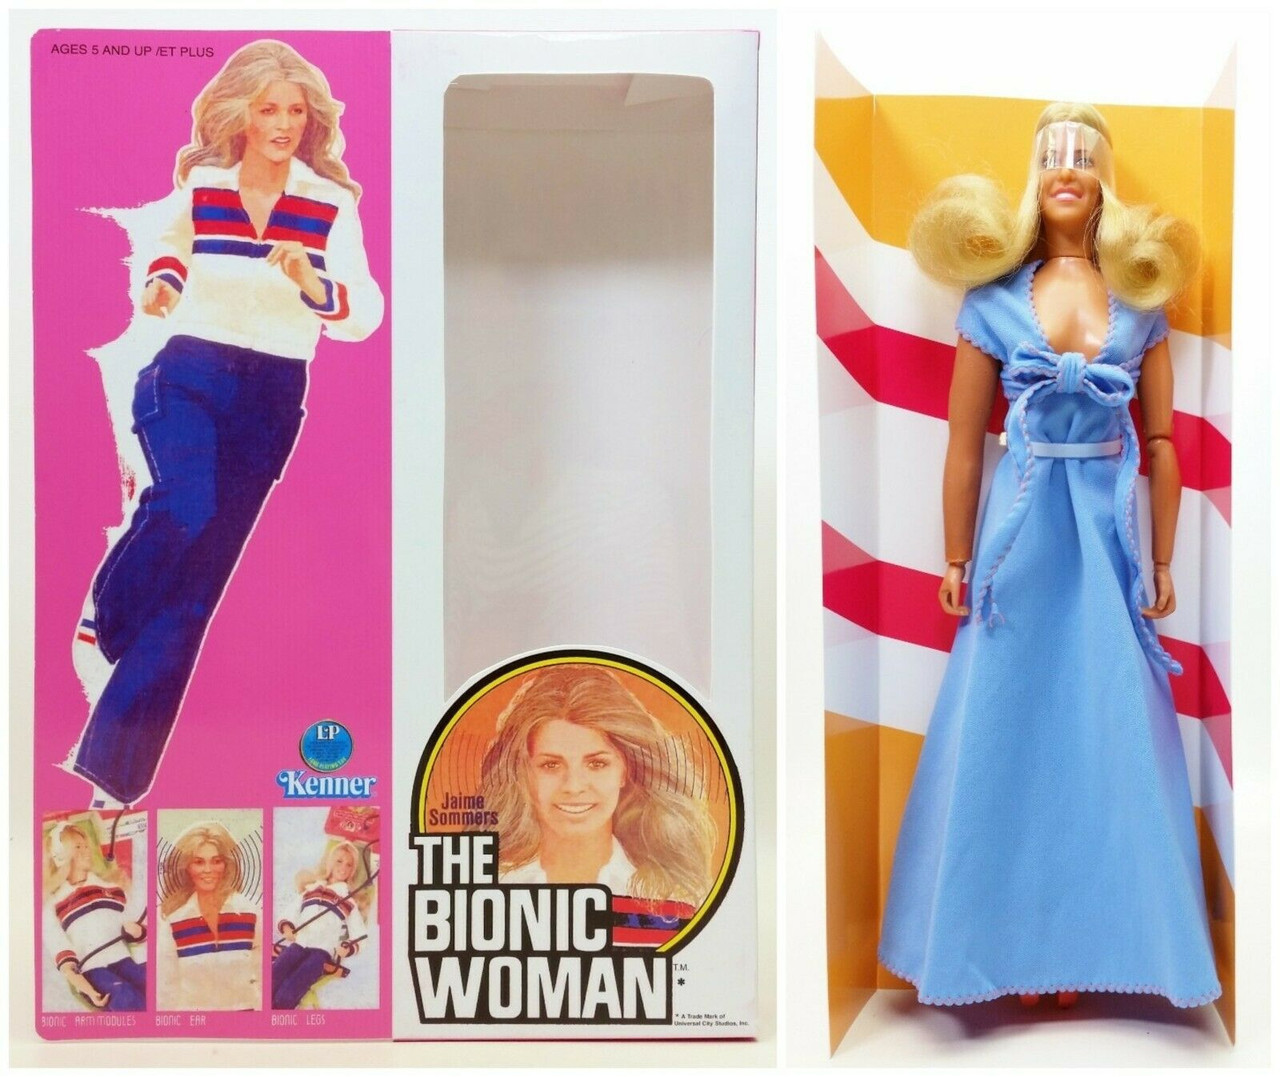 1977 Kenner The Bionic Woman Jamie Sommers Doll In Reproduction Box (8)  No.65800 - We-R-Toys